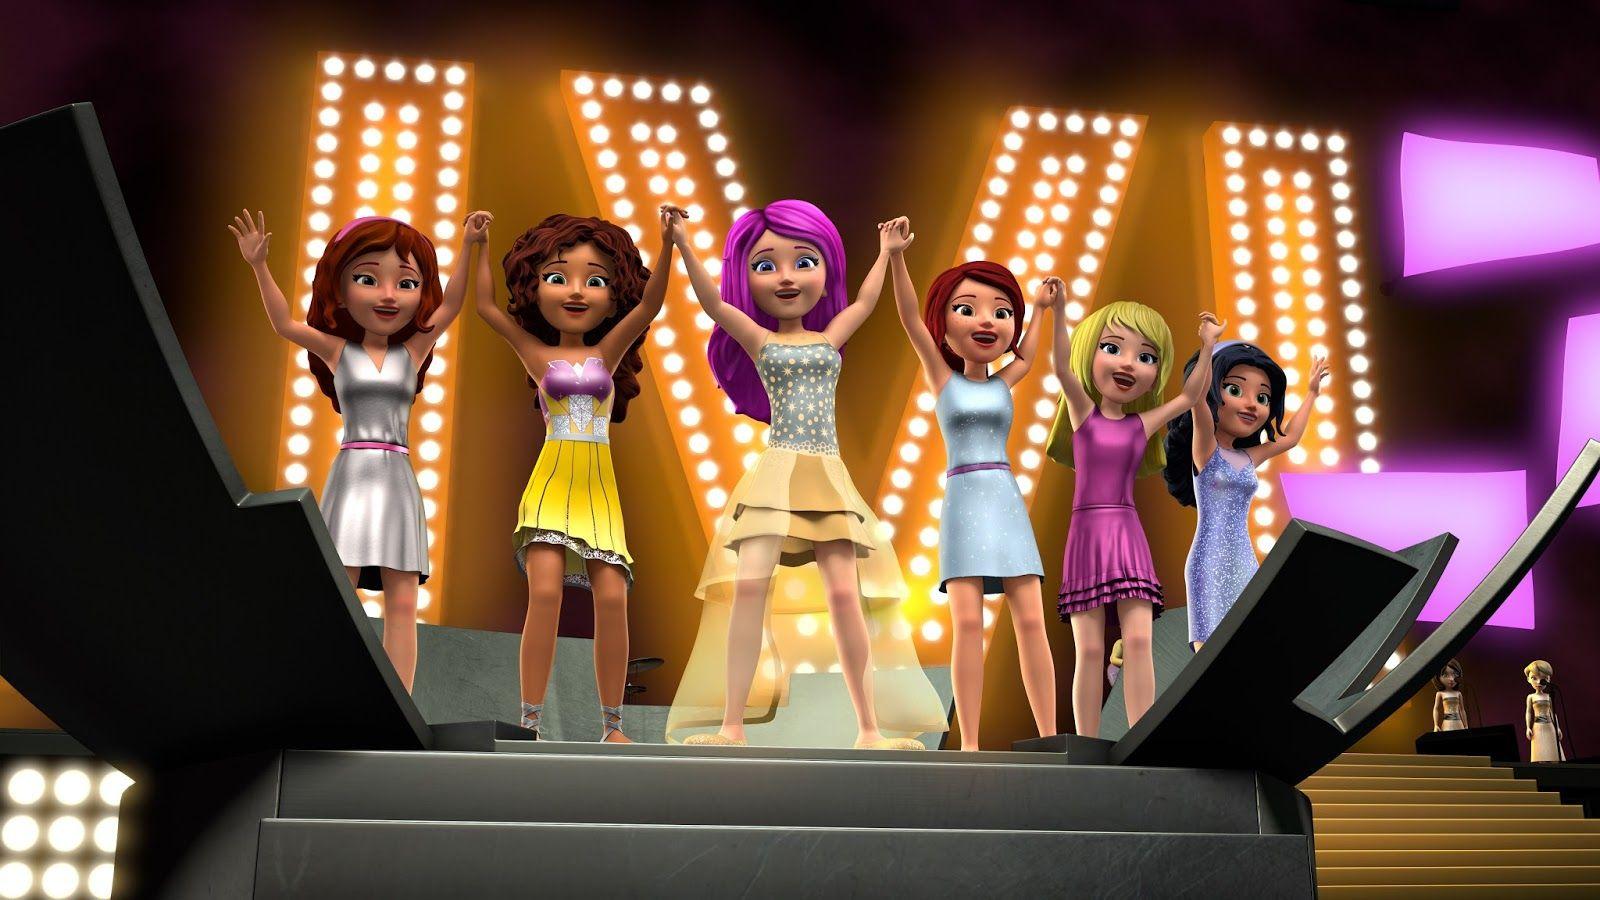 Lego Friends Wallpapers.